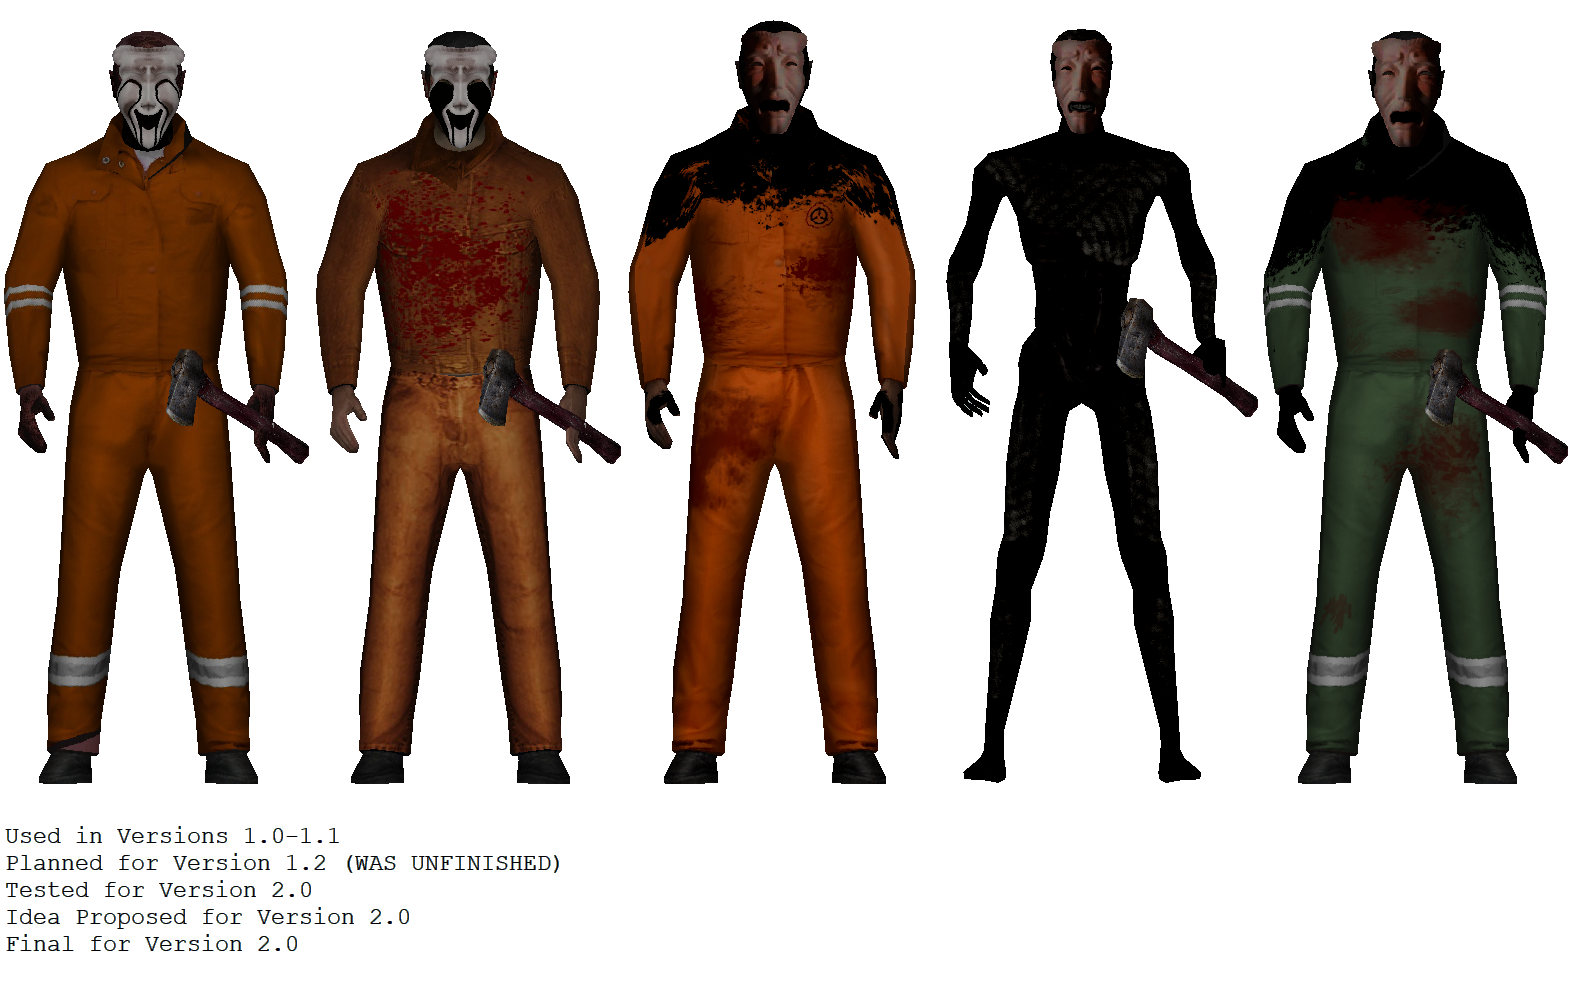 035 image - SCP - Containment Breach Blood Edition mod for SCP - Containment  Breach - ModDB